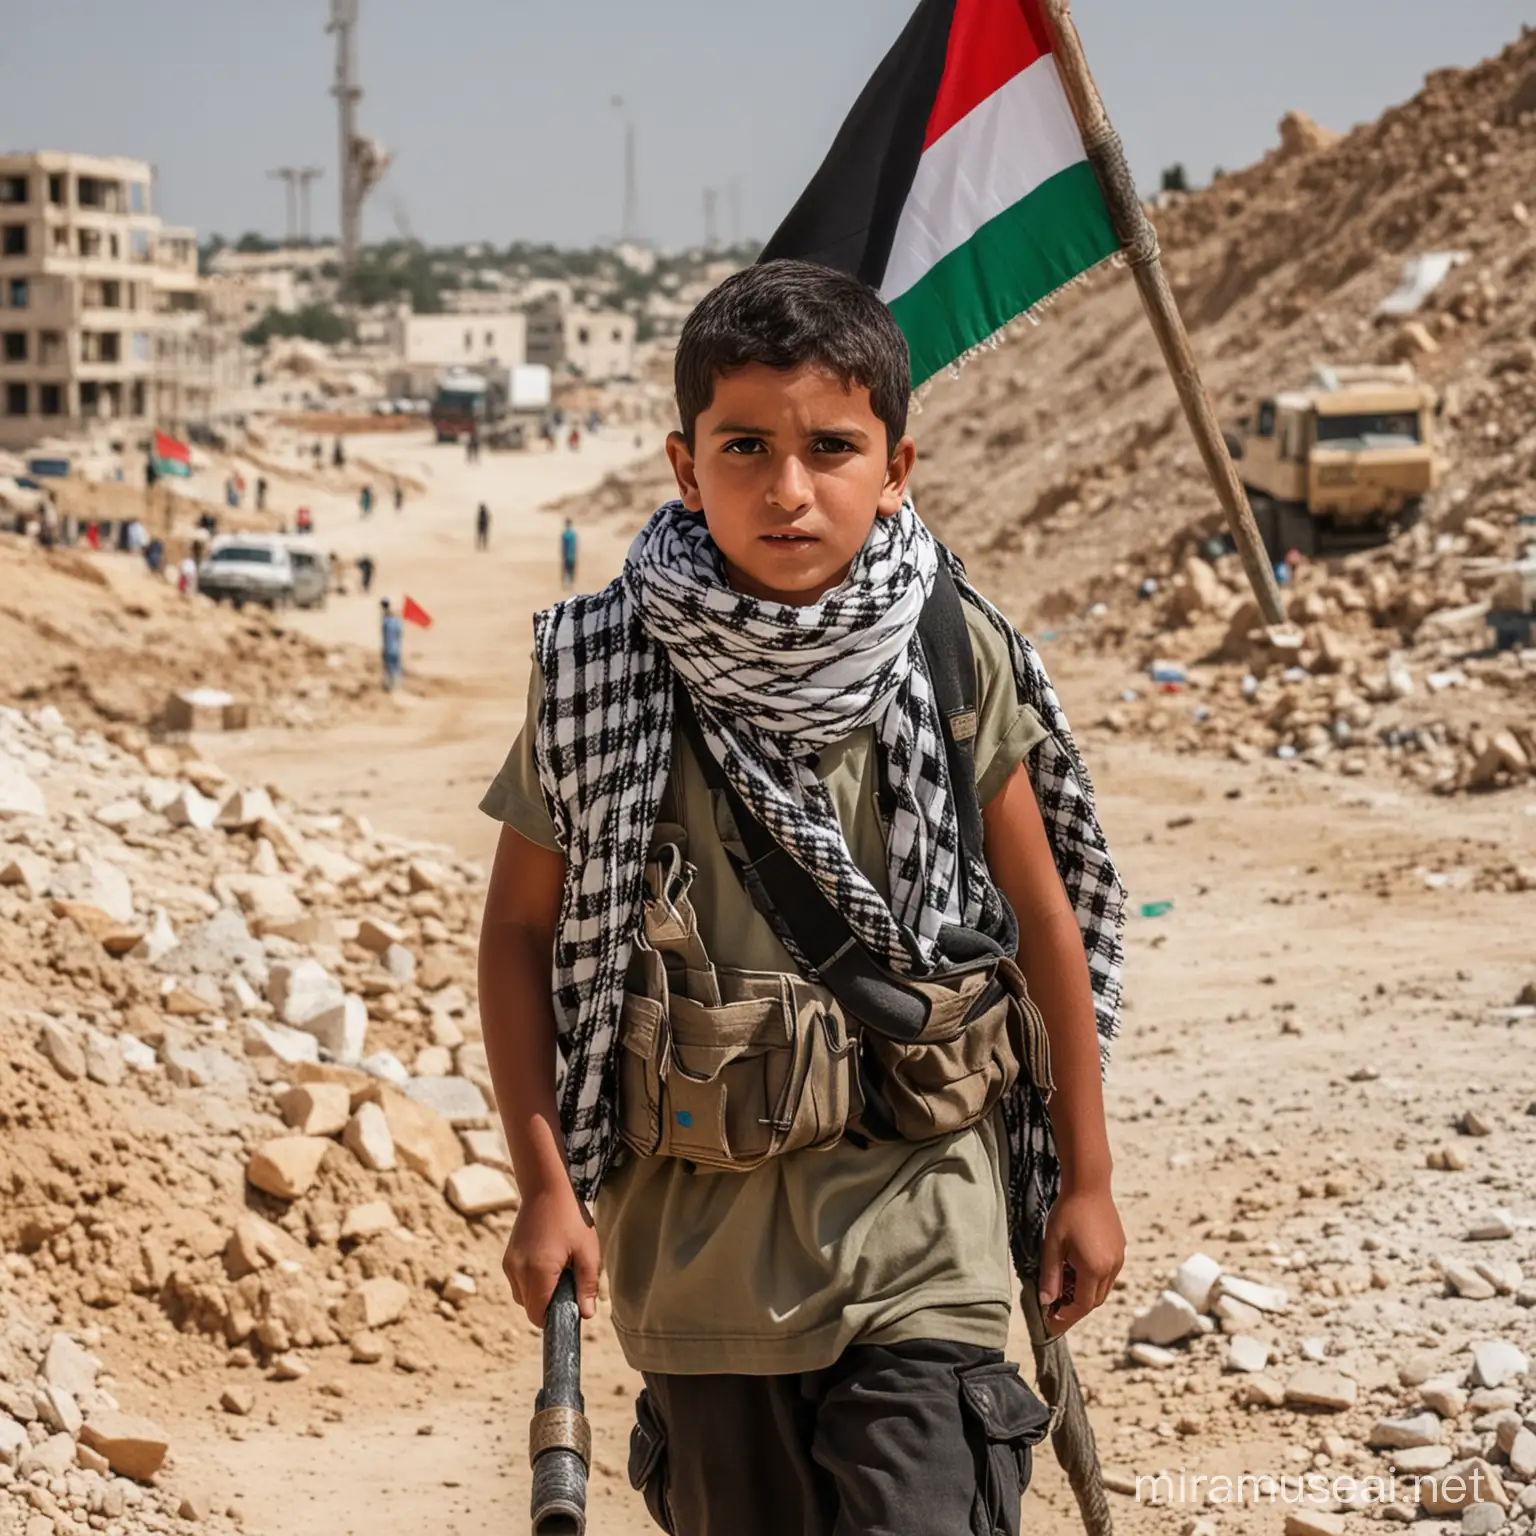 A hardworking loyal conscientious brave Palestinian at a construction site with palestinian keffiyeh or kufiyyeh around the neck .... with a Palestinian flag in the background 
Hammer in tha hand with a baby carrying on his back